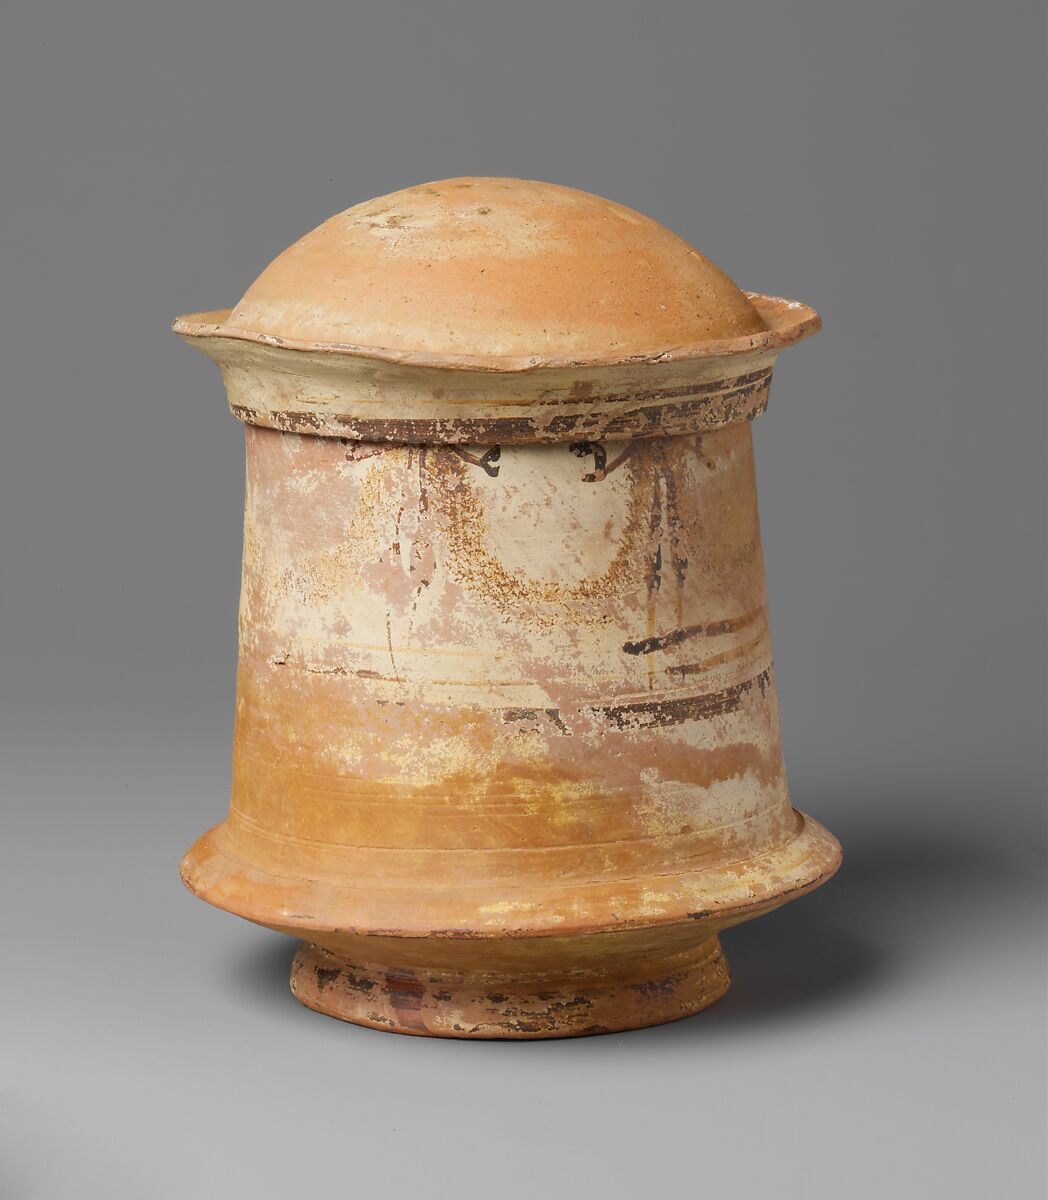 Terracotta pyxis (cosmetic box) with domed lid, Terracotta, Greek, Asia Minor 